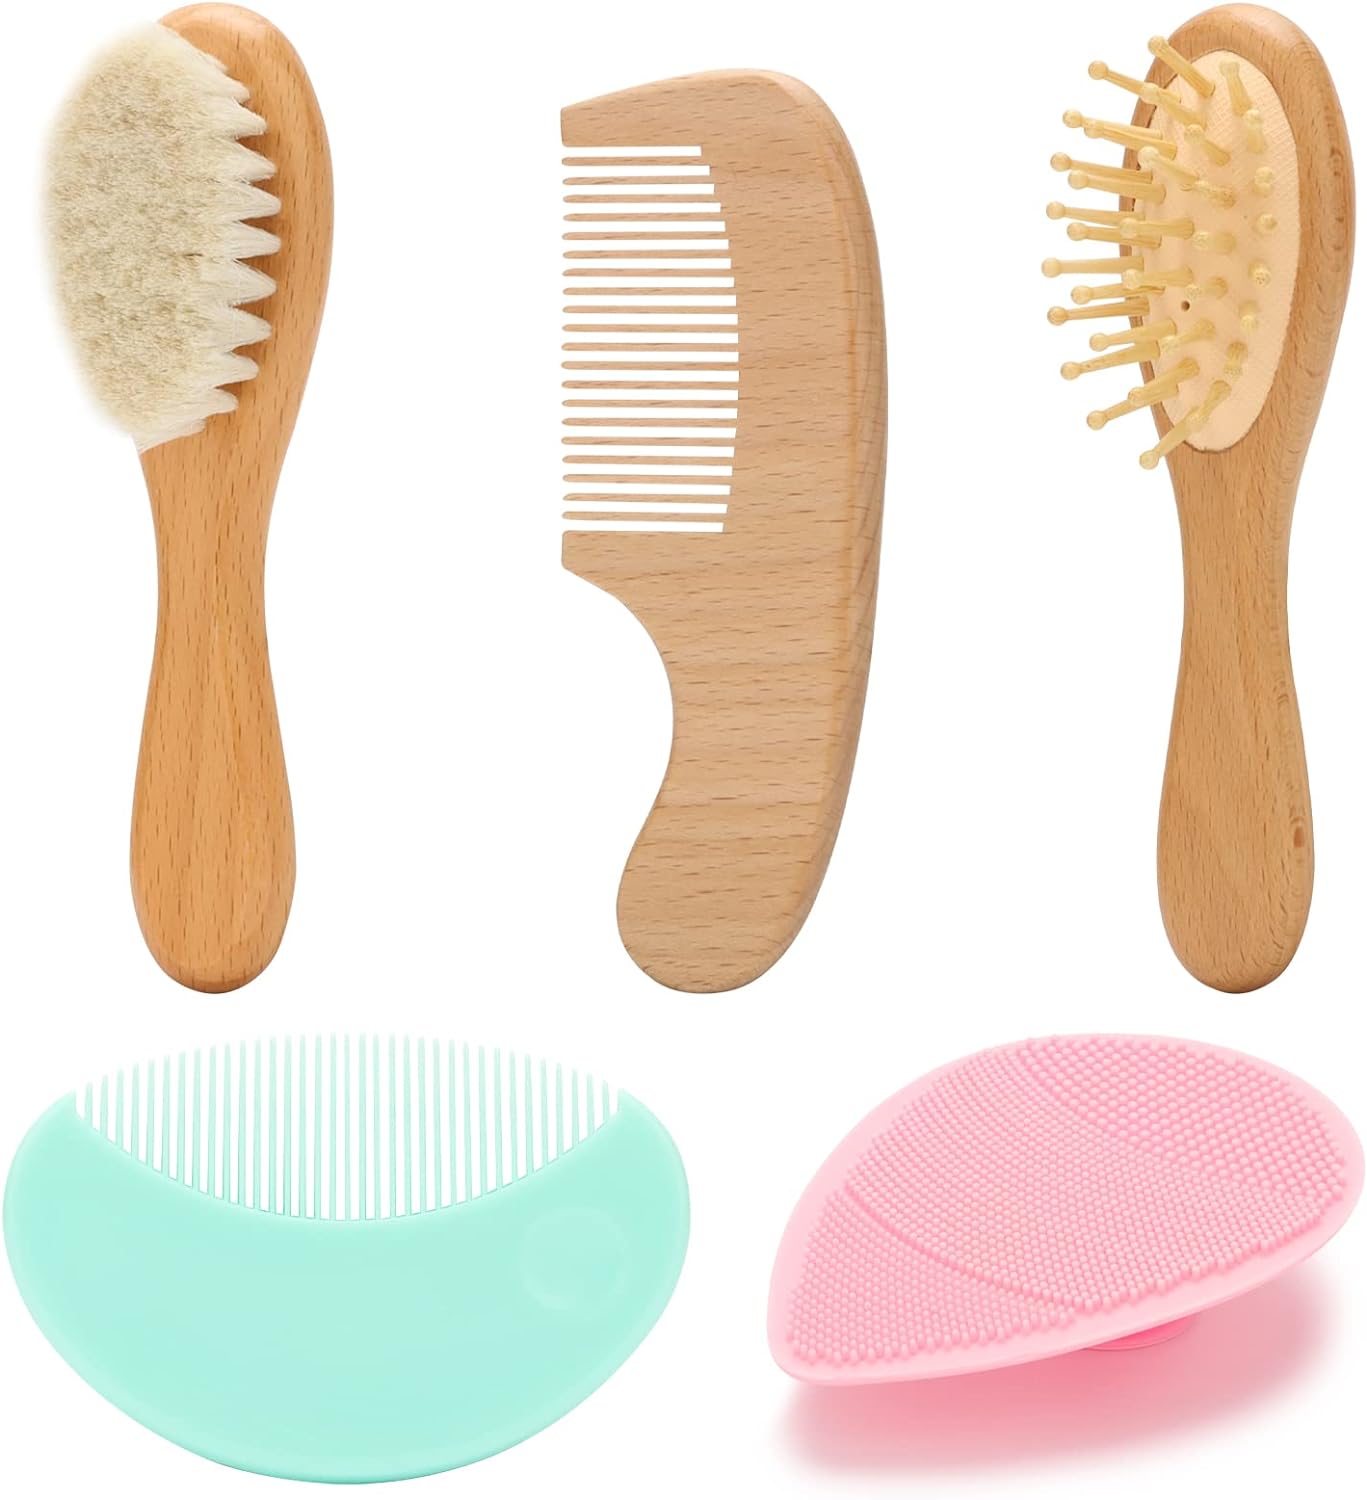 Goat Baby Hair Brush Set, Wooden Comb Massage Scalp Comb, Safe Natural Hair Care Kit, Soft Silicone Bath Brush for Newborns Toddlers (Brush Set+ Pink Massager)